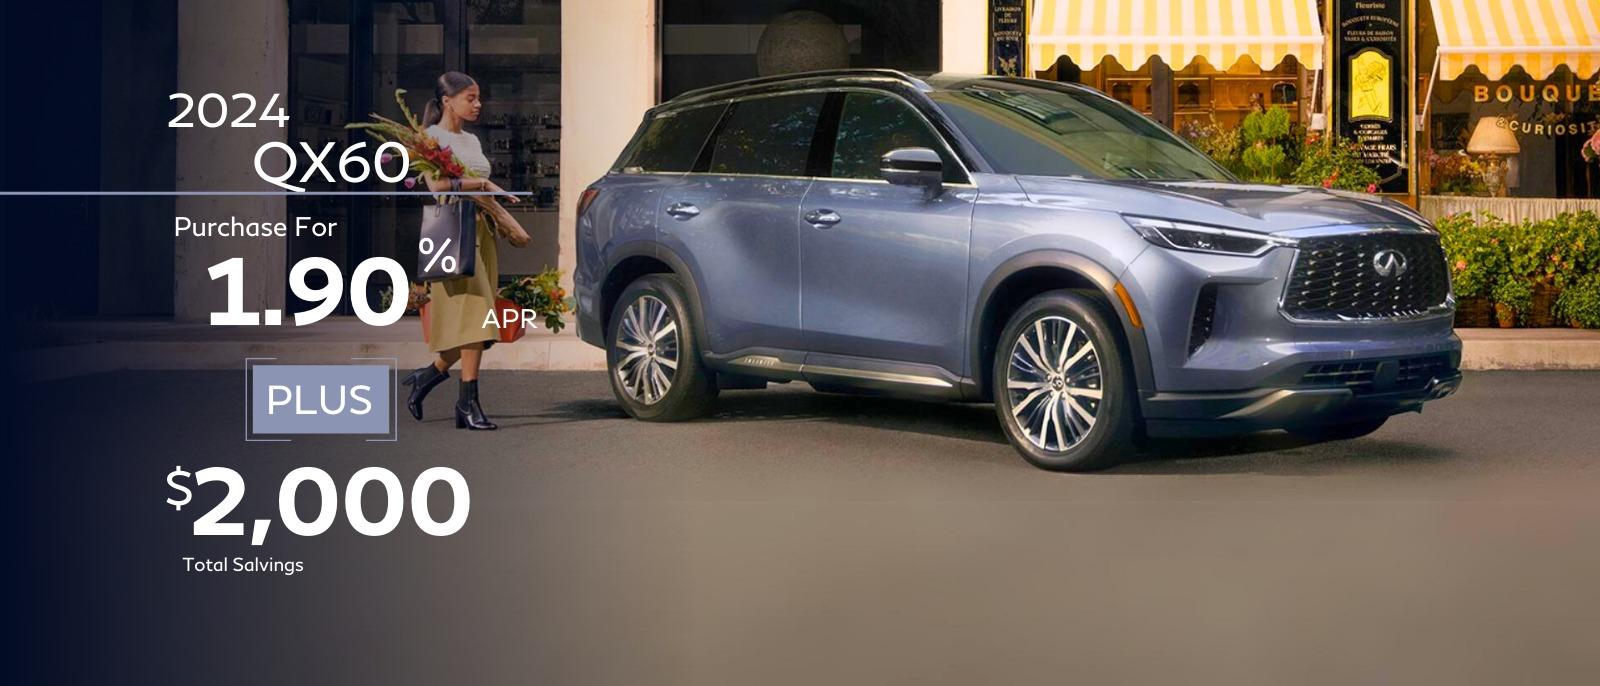 2024 QX60
1.9% APR Financing For up to 36 Months Plus up to $2,000 Total Saving